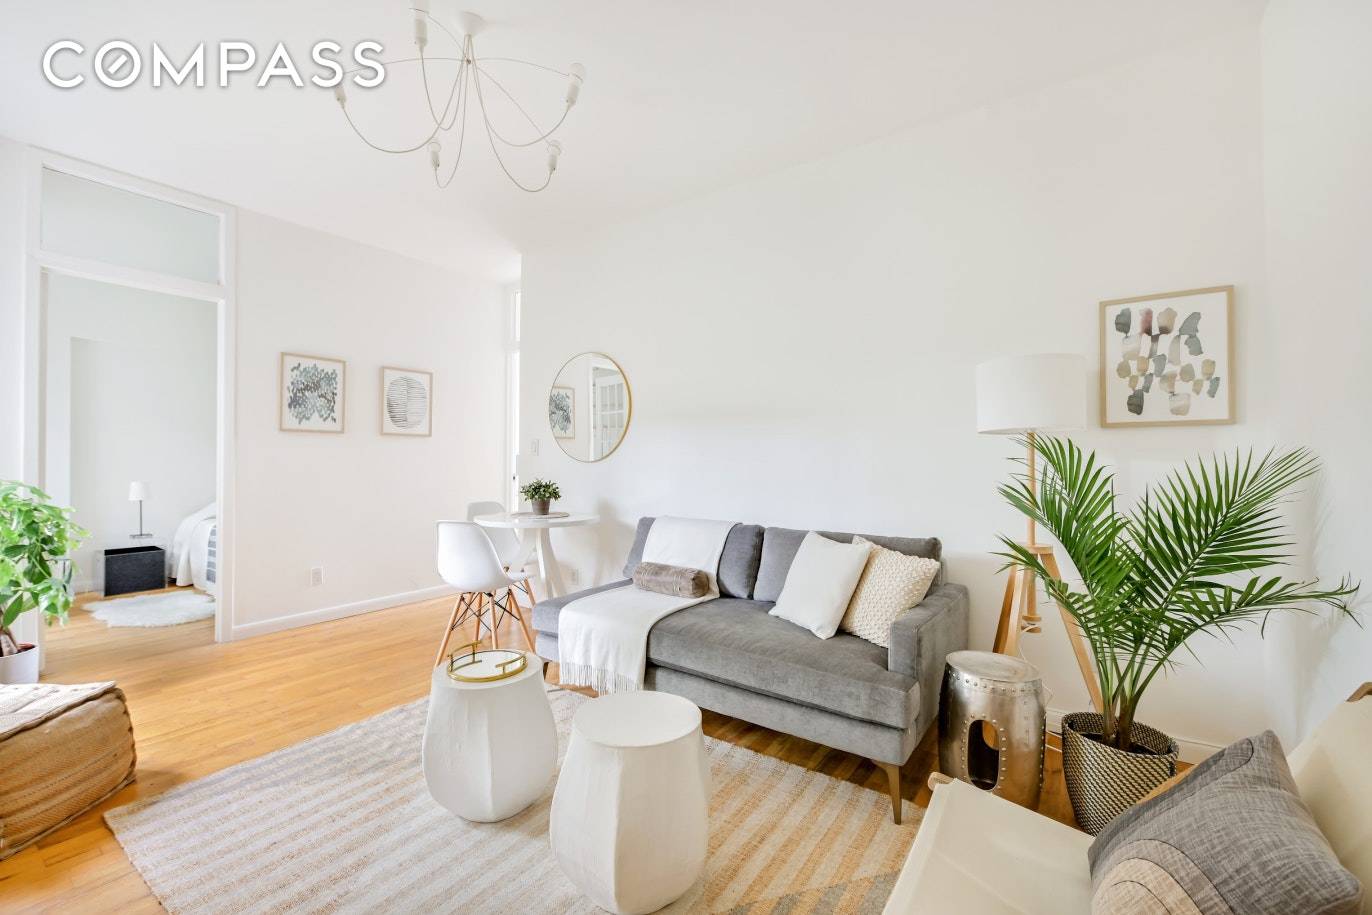 Welcome home to this light filled, modern two bedroom co op.